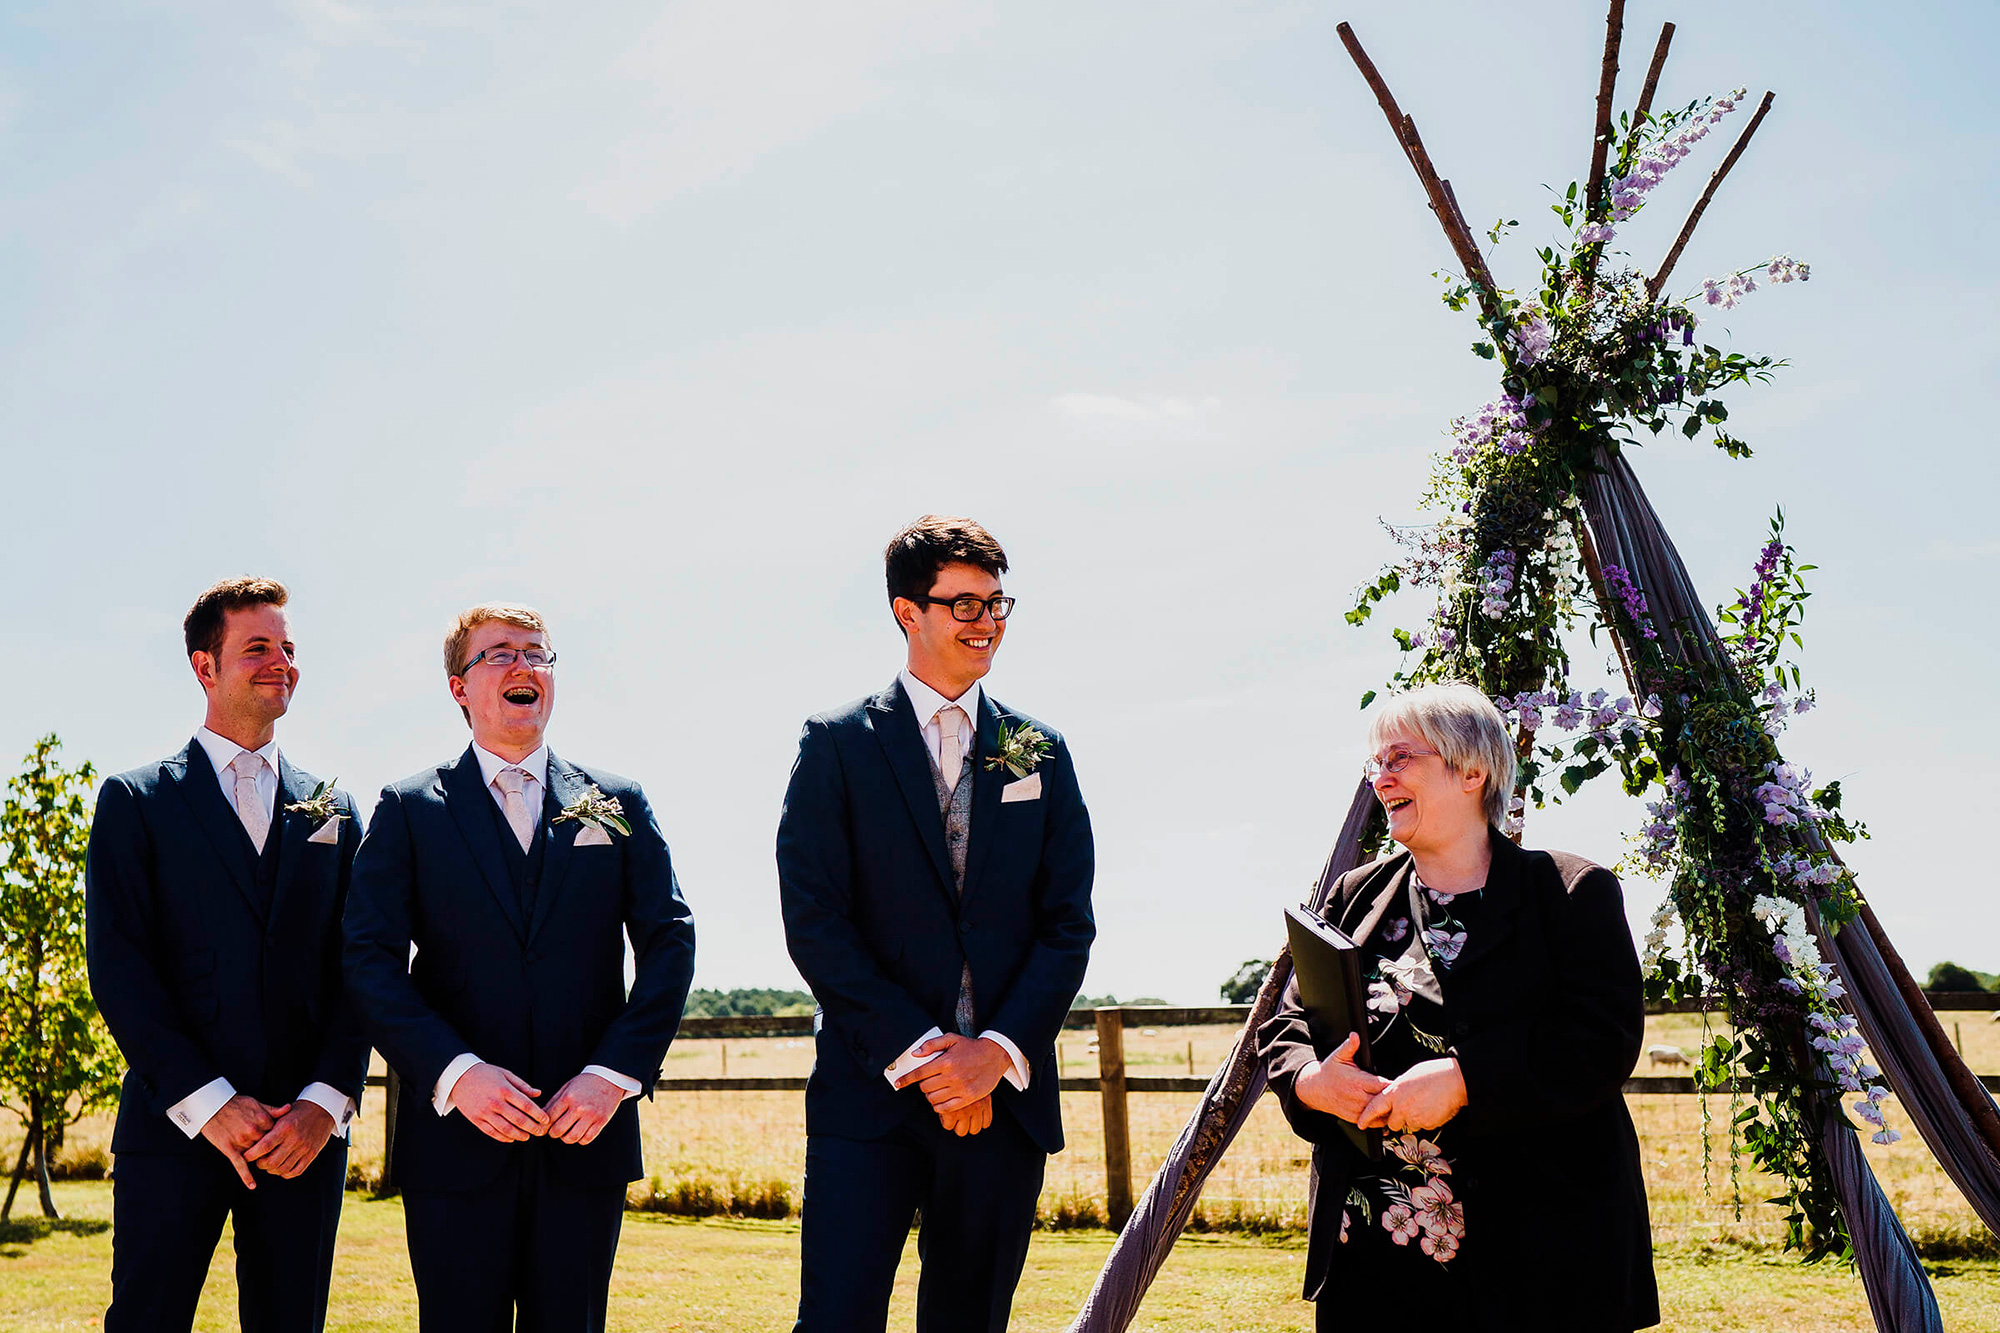 Lucy Simon Rustic Quirky Wedding Rob Dodsworth Photography 013